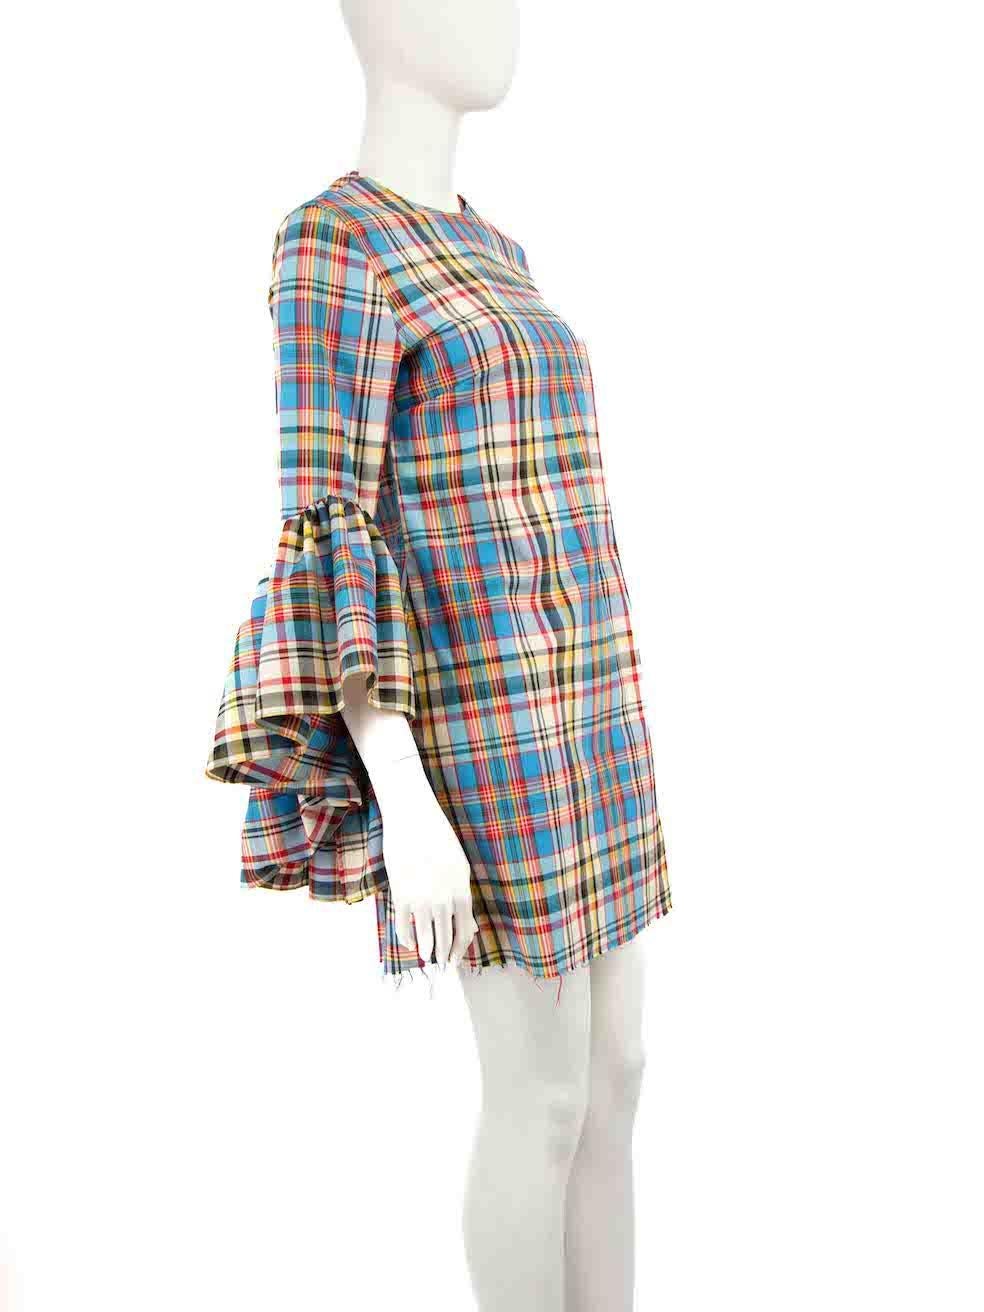 CONDITION is Never worn. No visible wear to dress is evident on this new Marques Almeida designer resale item.
 
 Details
 Multicolour- blue, red , black, yellow
 Polyester
 Dress
 Tartan pattern
 Long ruffle oyster sleeves
 Mini
 Round neck
 Back